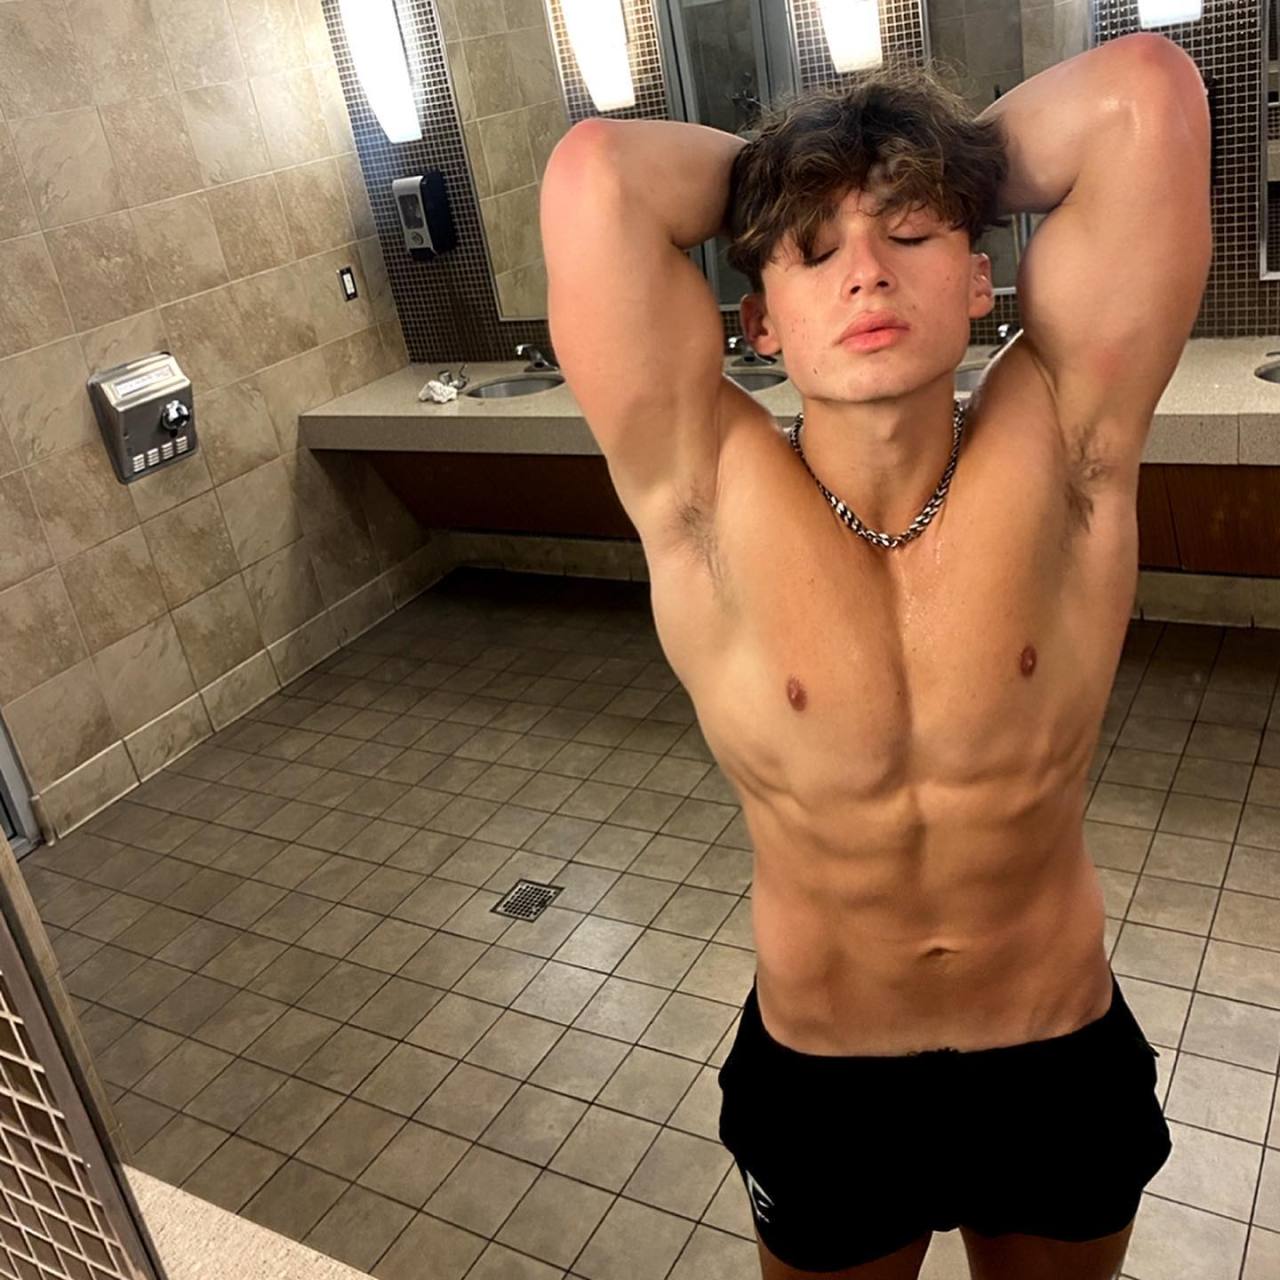 strong-young-hot-bro-cole-gonzales-shirtless-fit-body-bathroom-flex